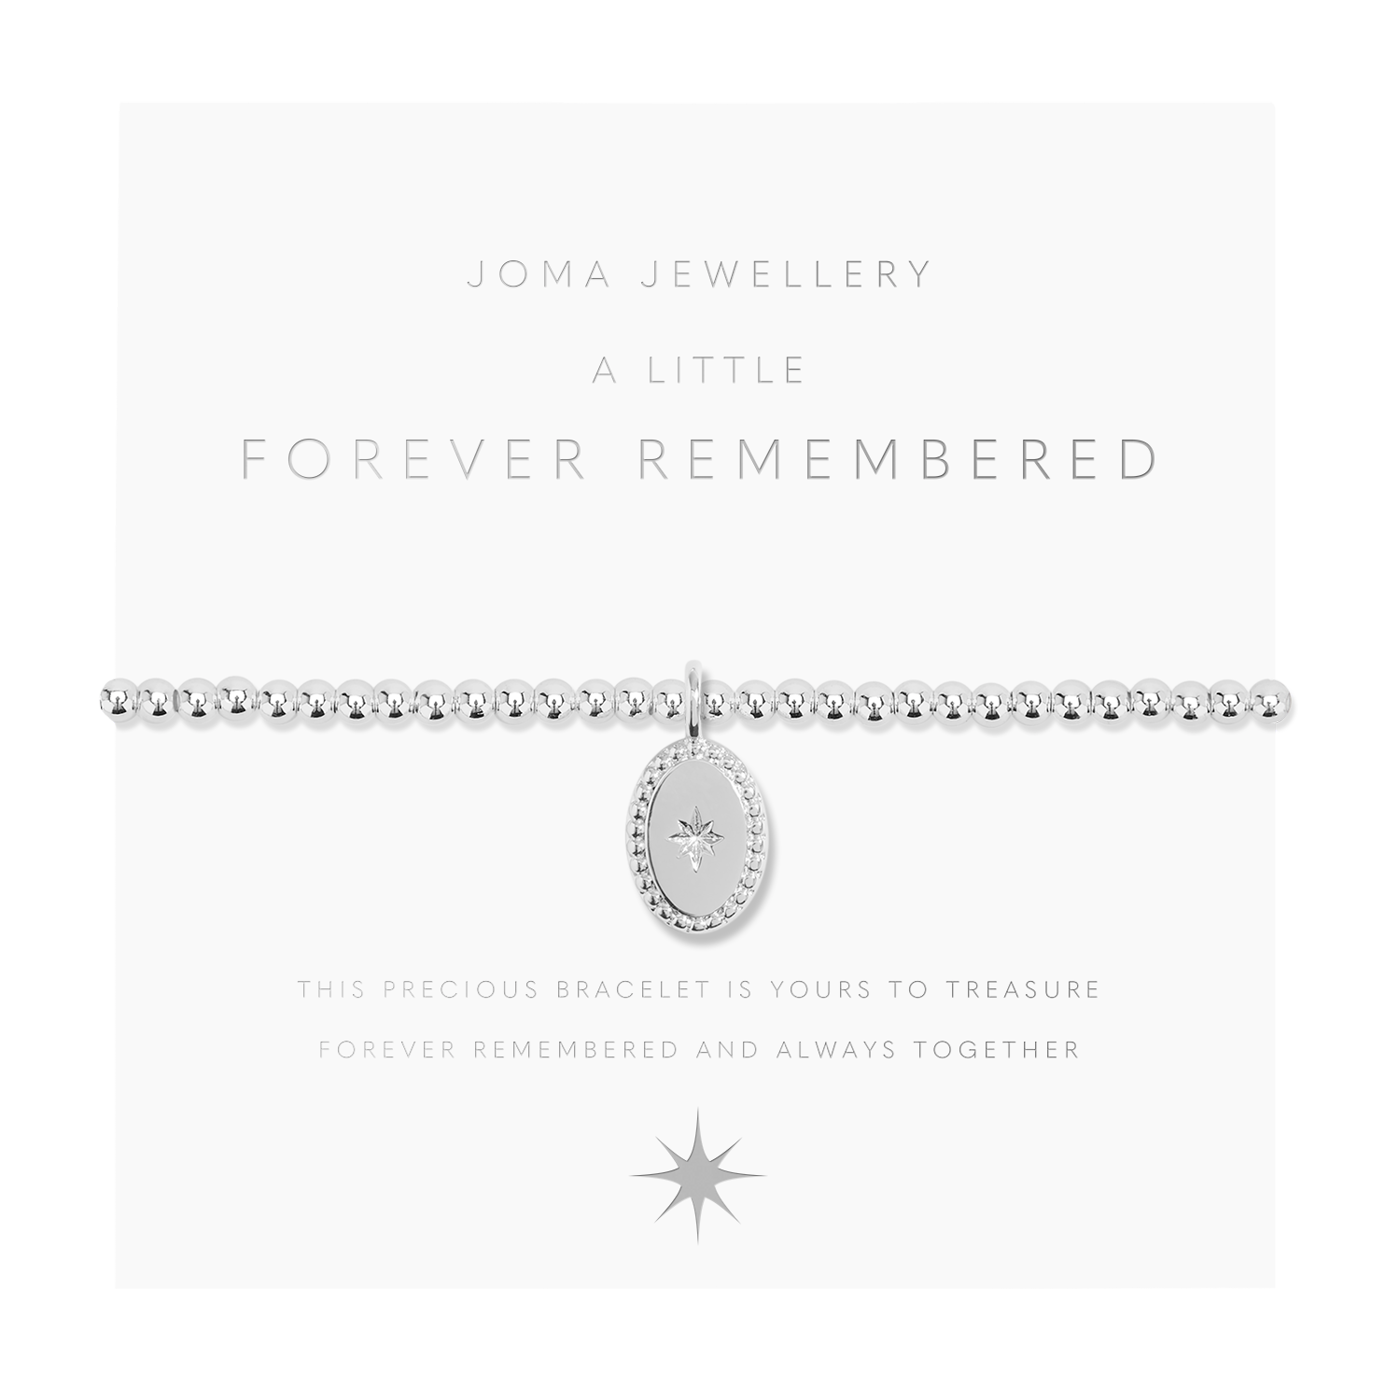 A Little 'Forever Remembered' Bracelet - Joma Jewellery